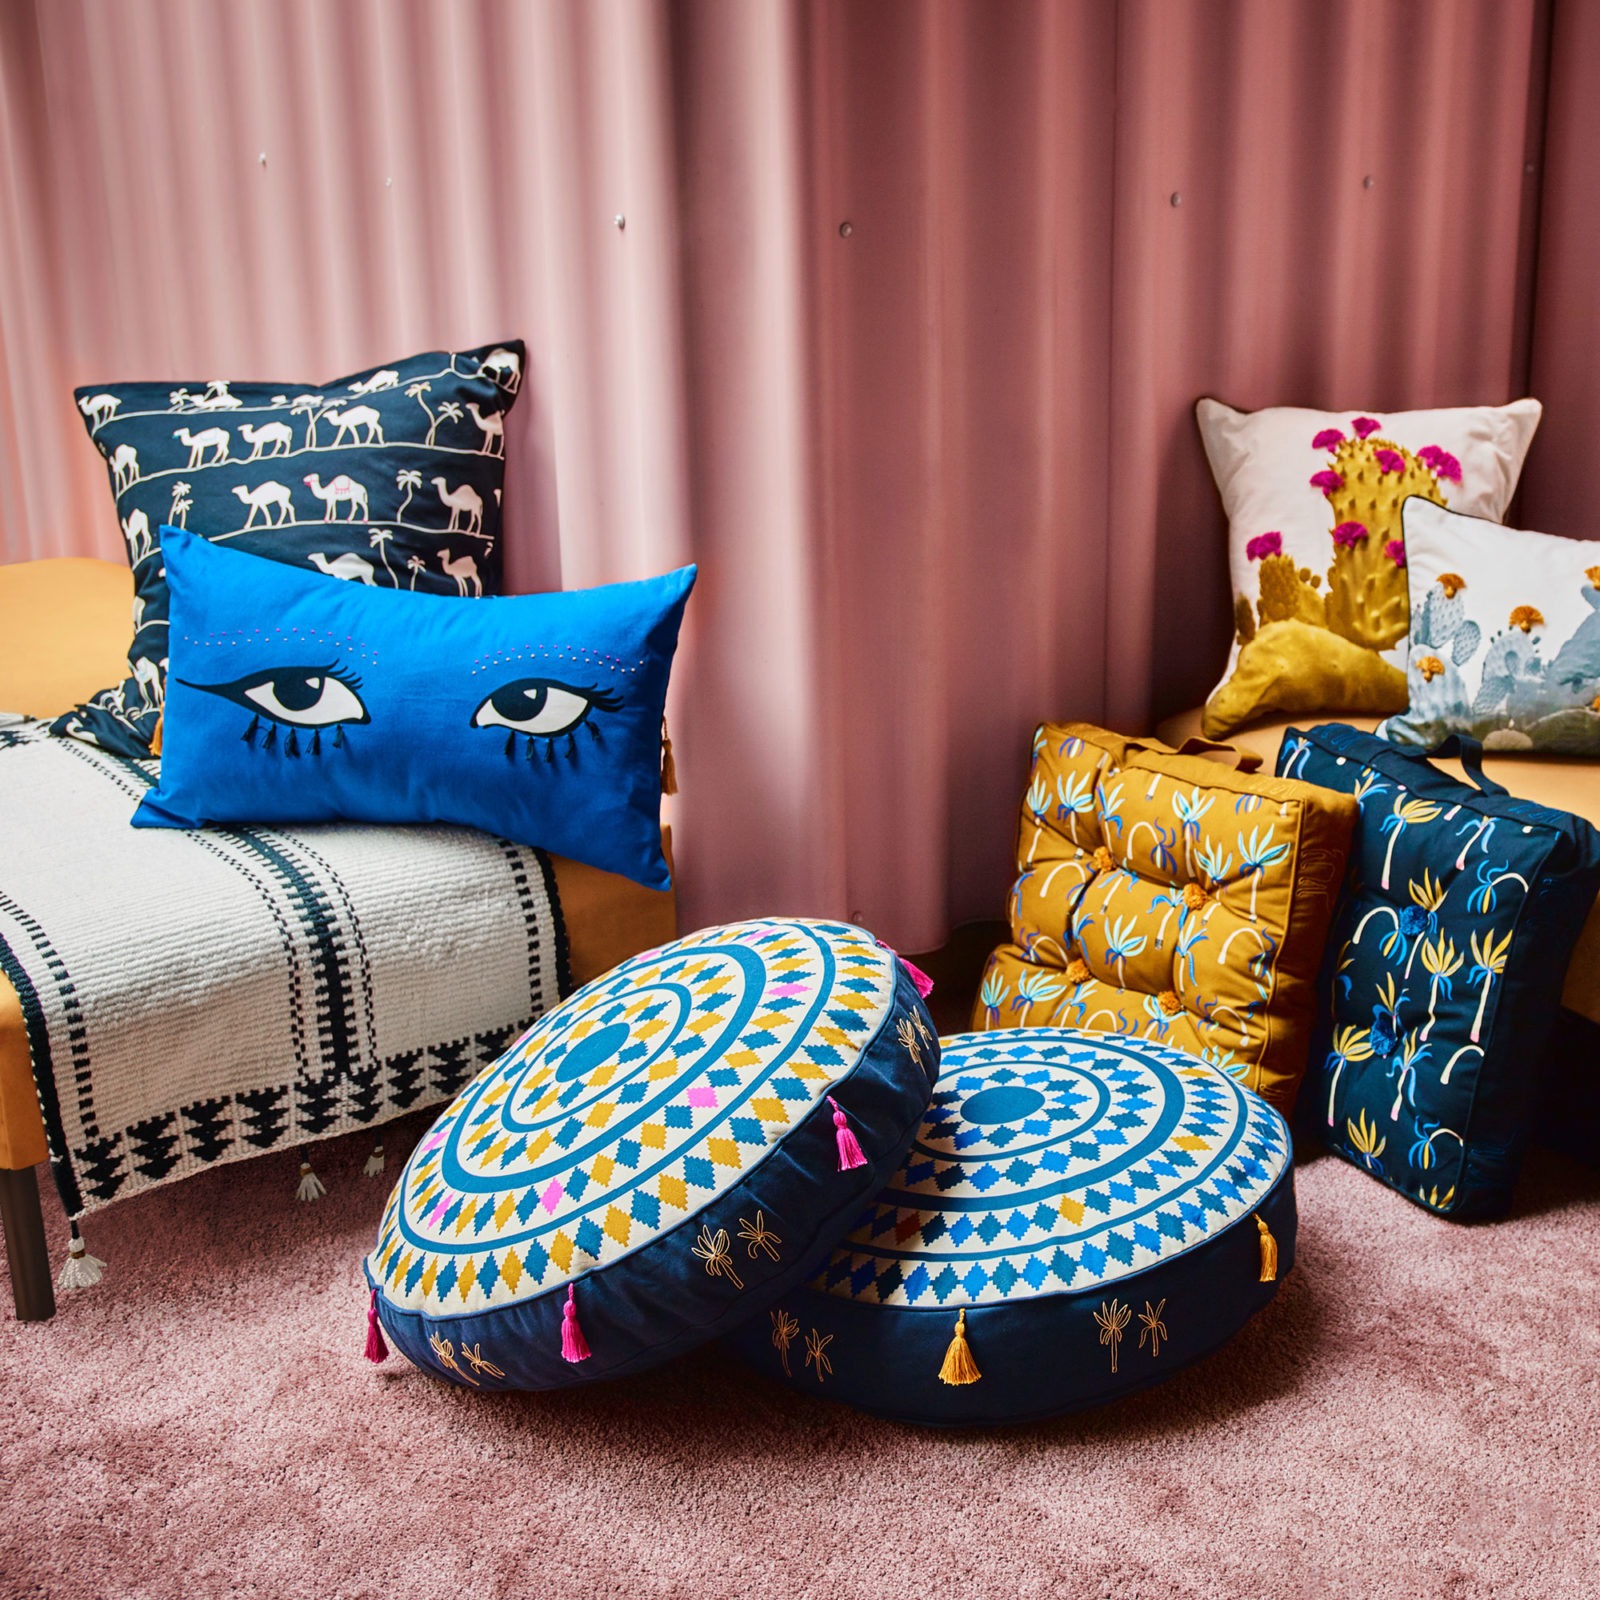 Brightly coloured handmade cushions, inspired by Jordanian handicrafts, including one pattern with big eyes and one with camels.